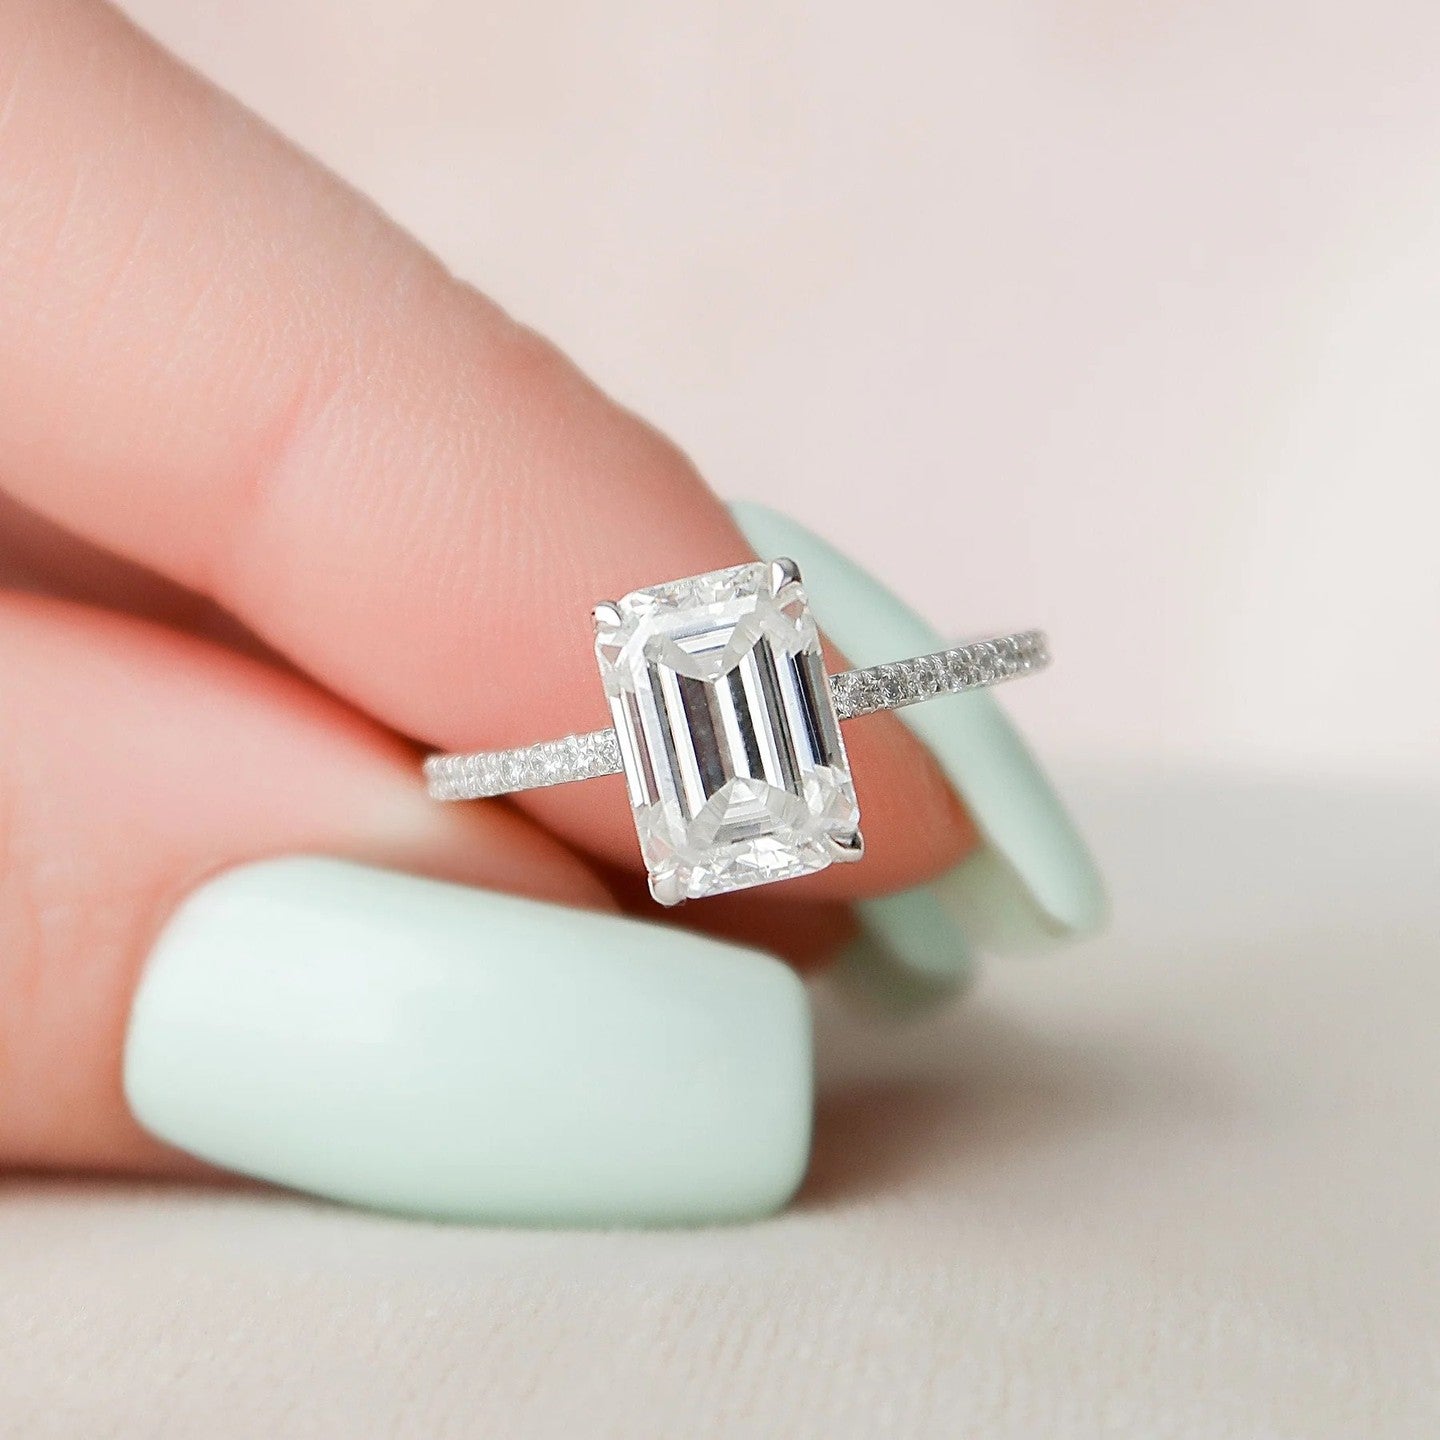 3.0 Carat Emerald Cut Diamond Ring with Pave Band